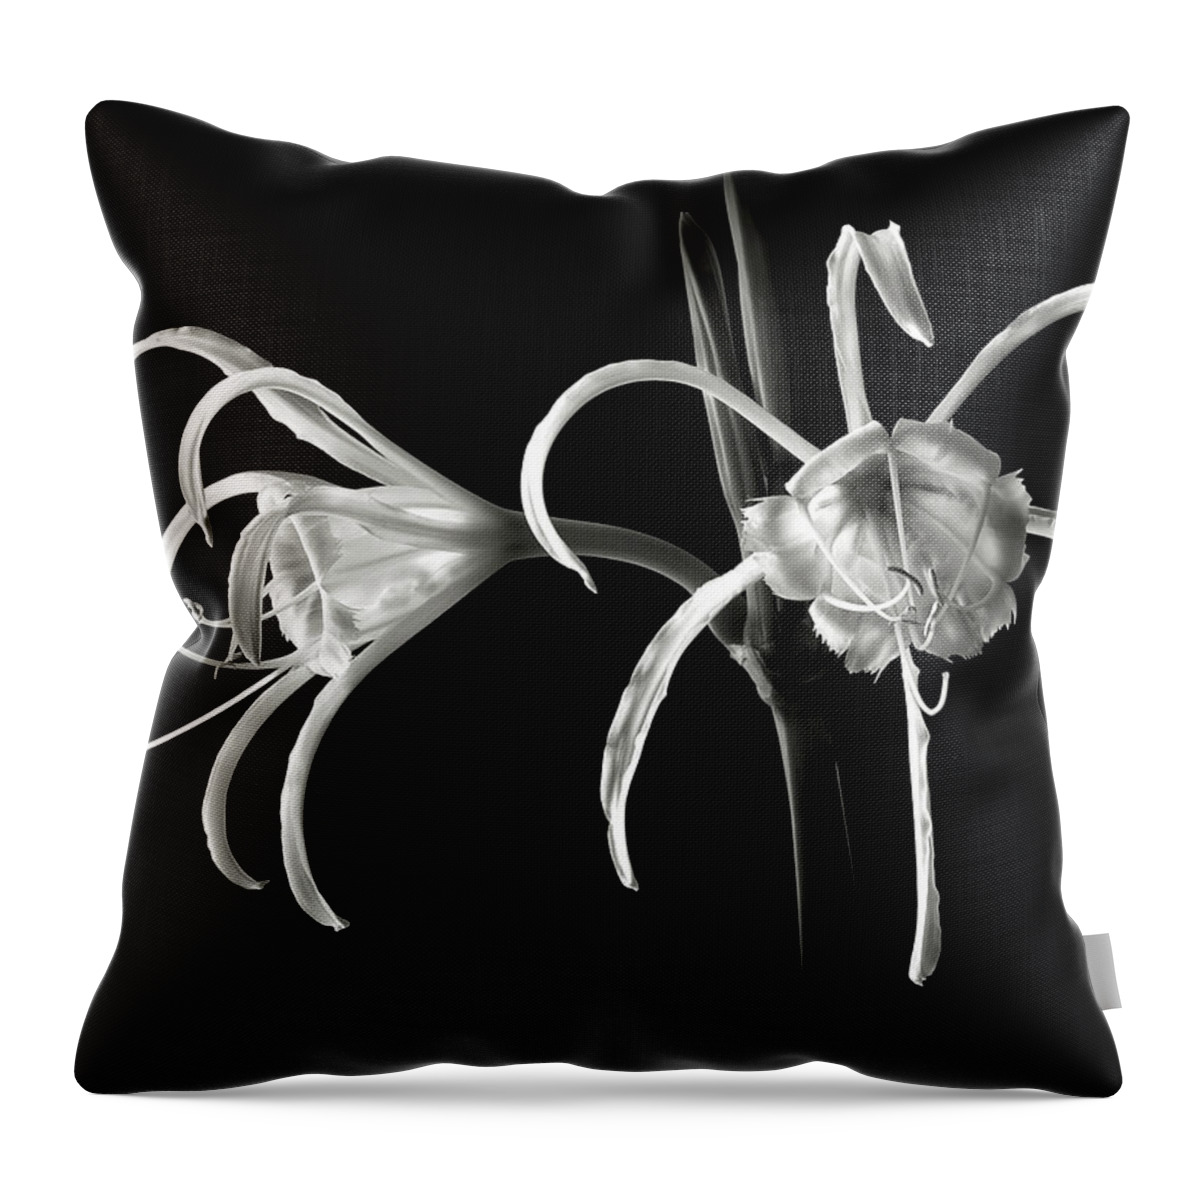 Flower Throw Pillow featuring the photograph Peruvian Daffodil in Black and White by Endre Balogh